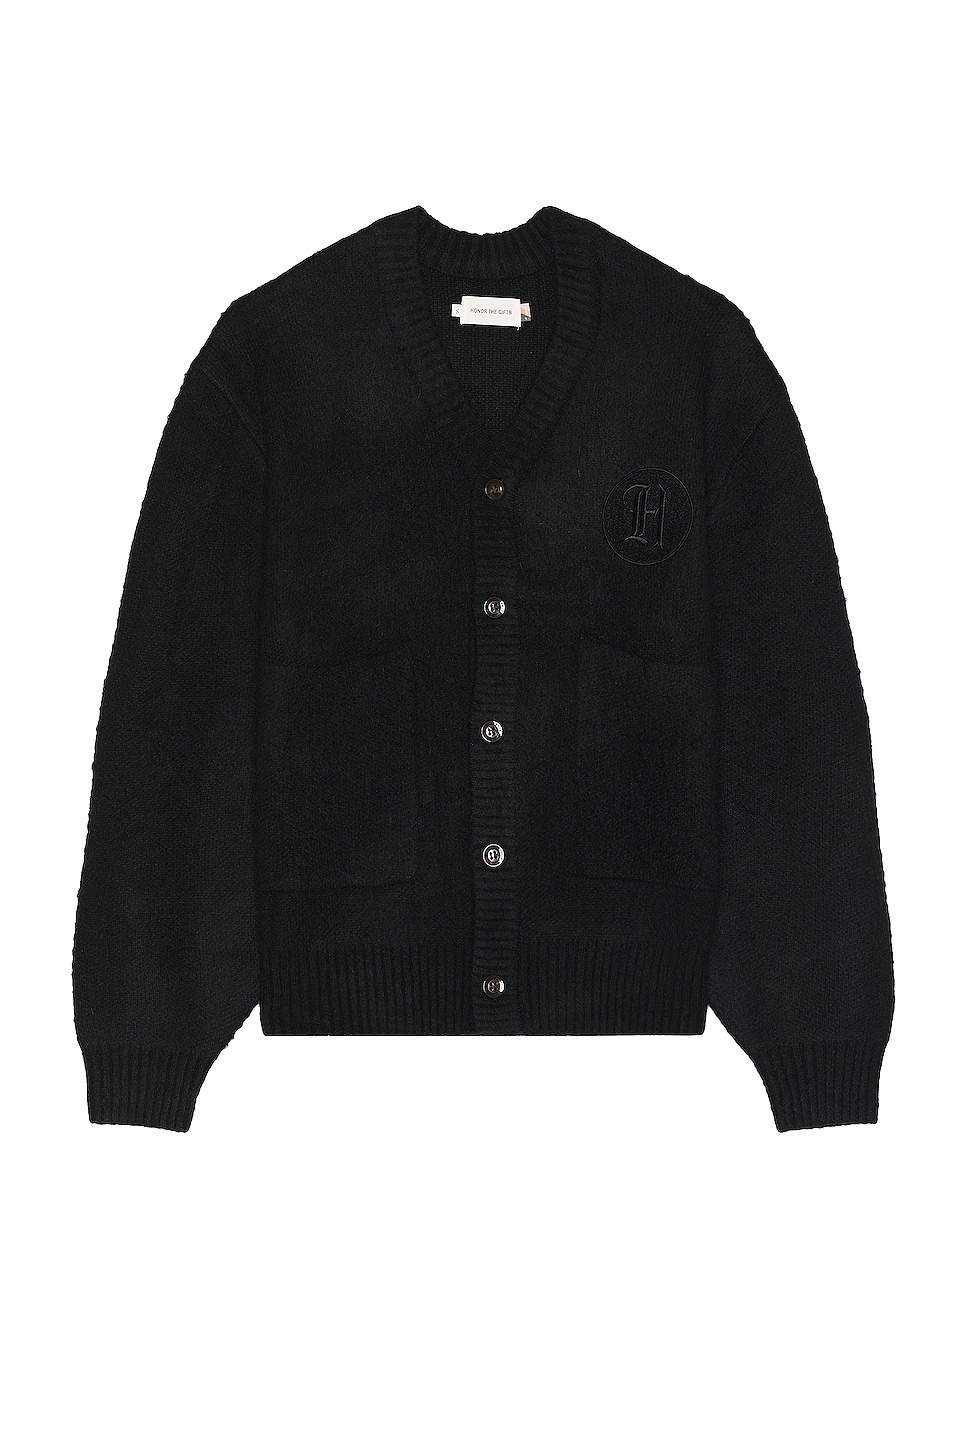 Image 1 of Honor The Gift Stamped Patch Cardigan in Black